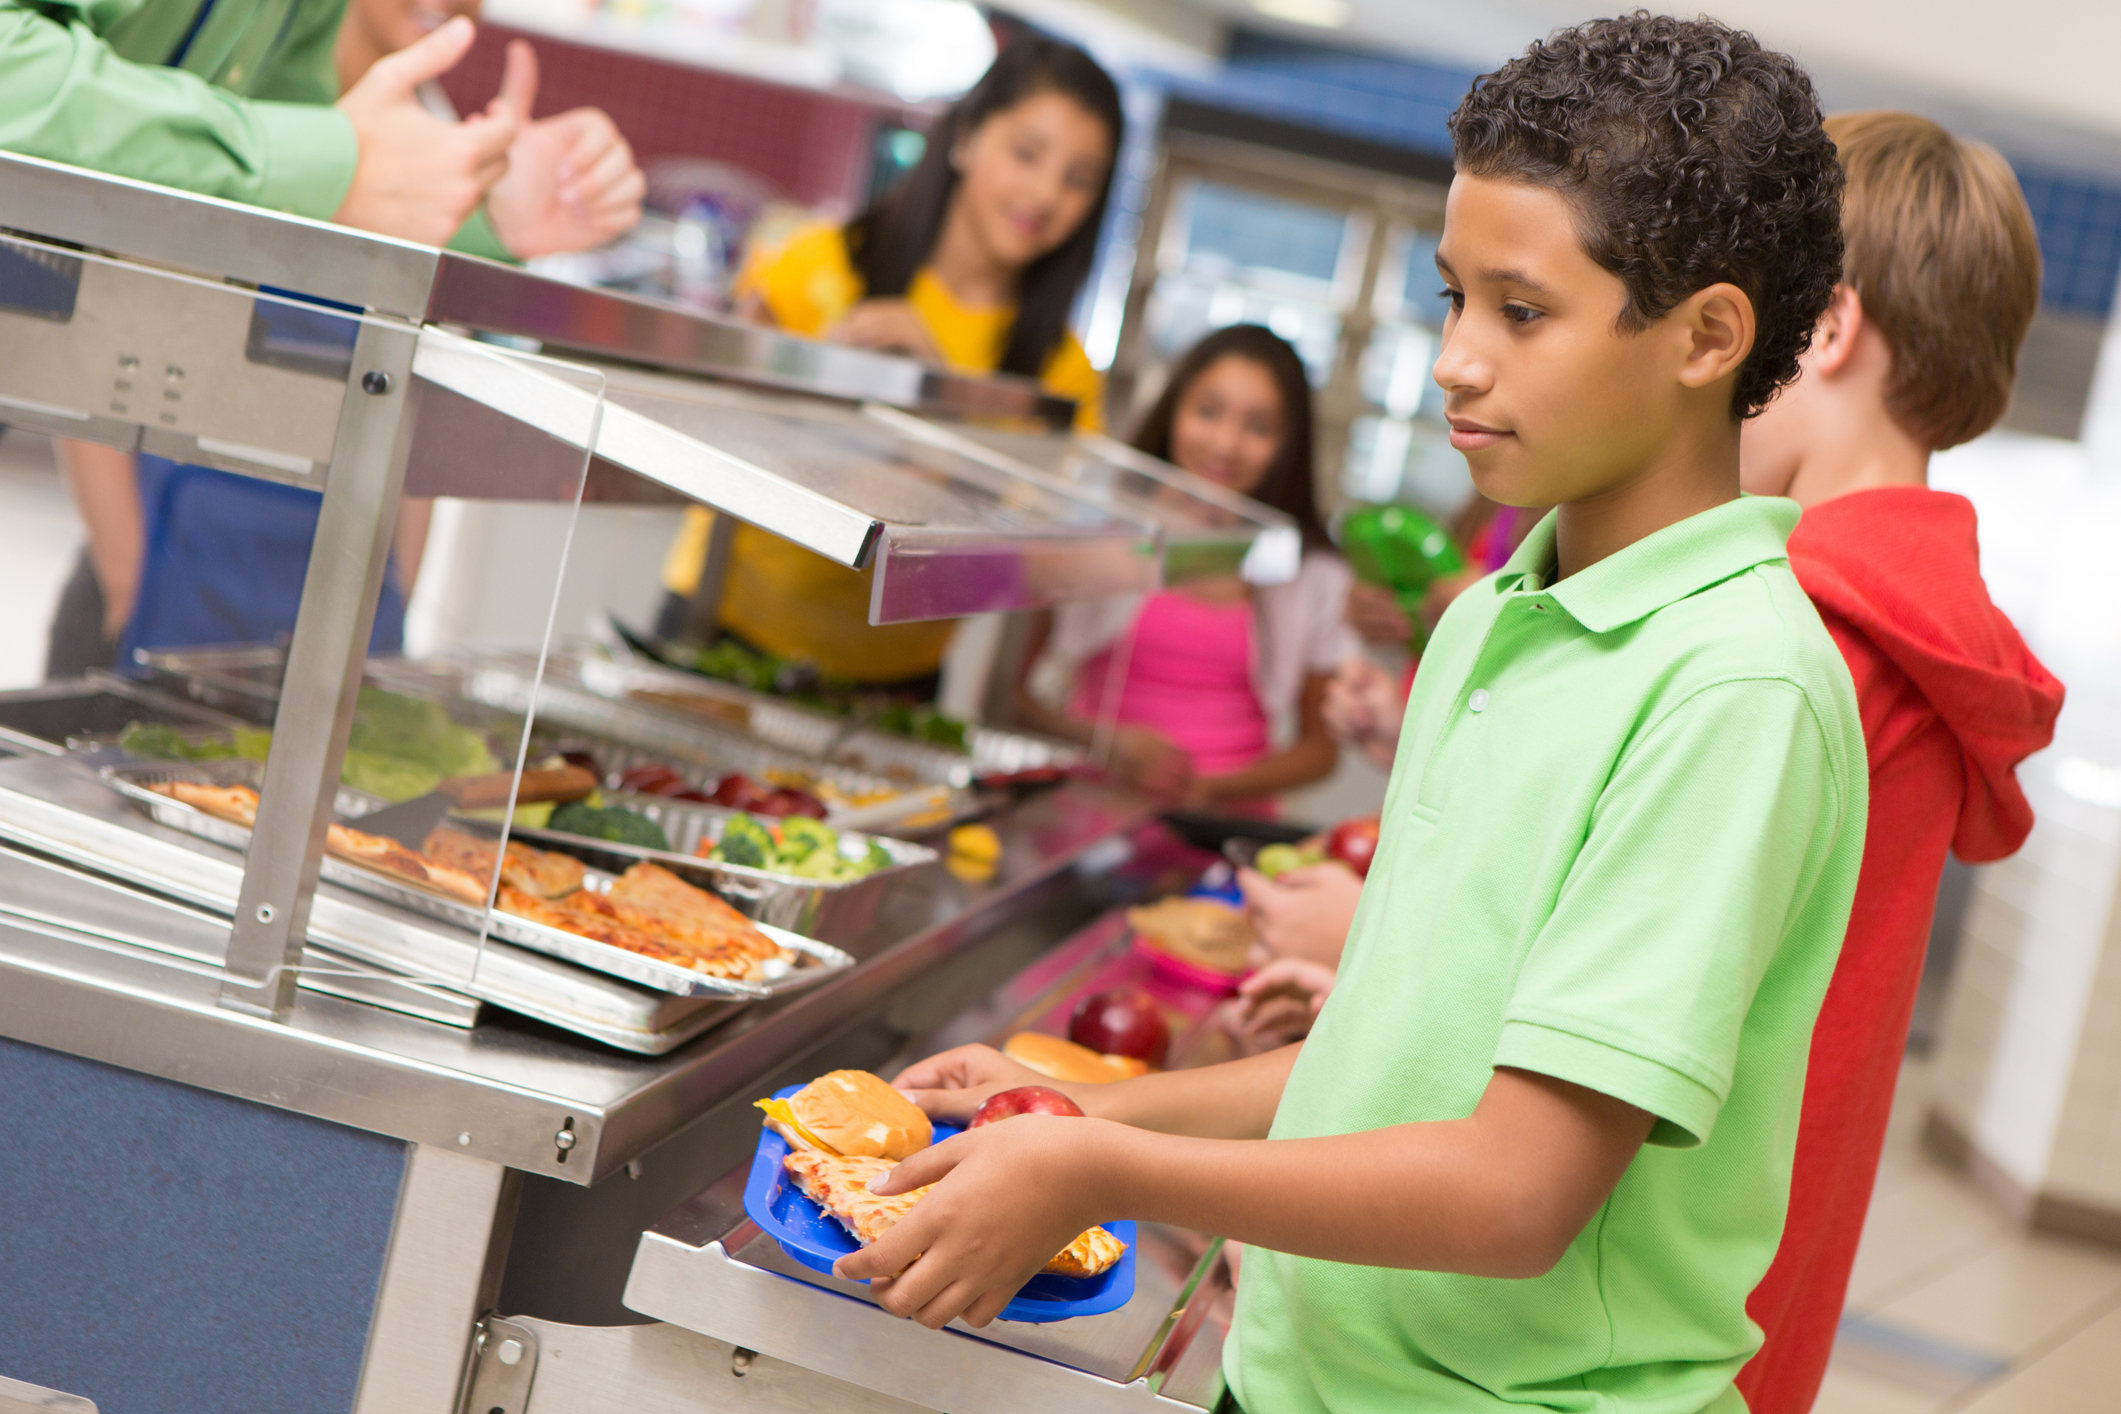 Students waiting in line at a school cafeteria, selecting food from various trays with assistance from staff